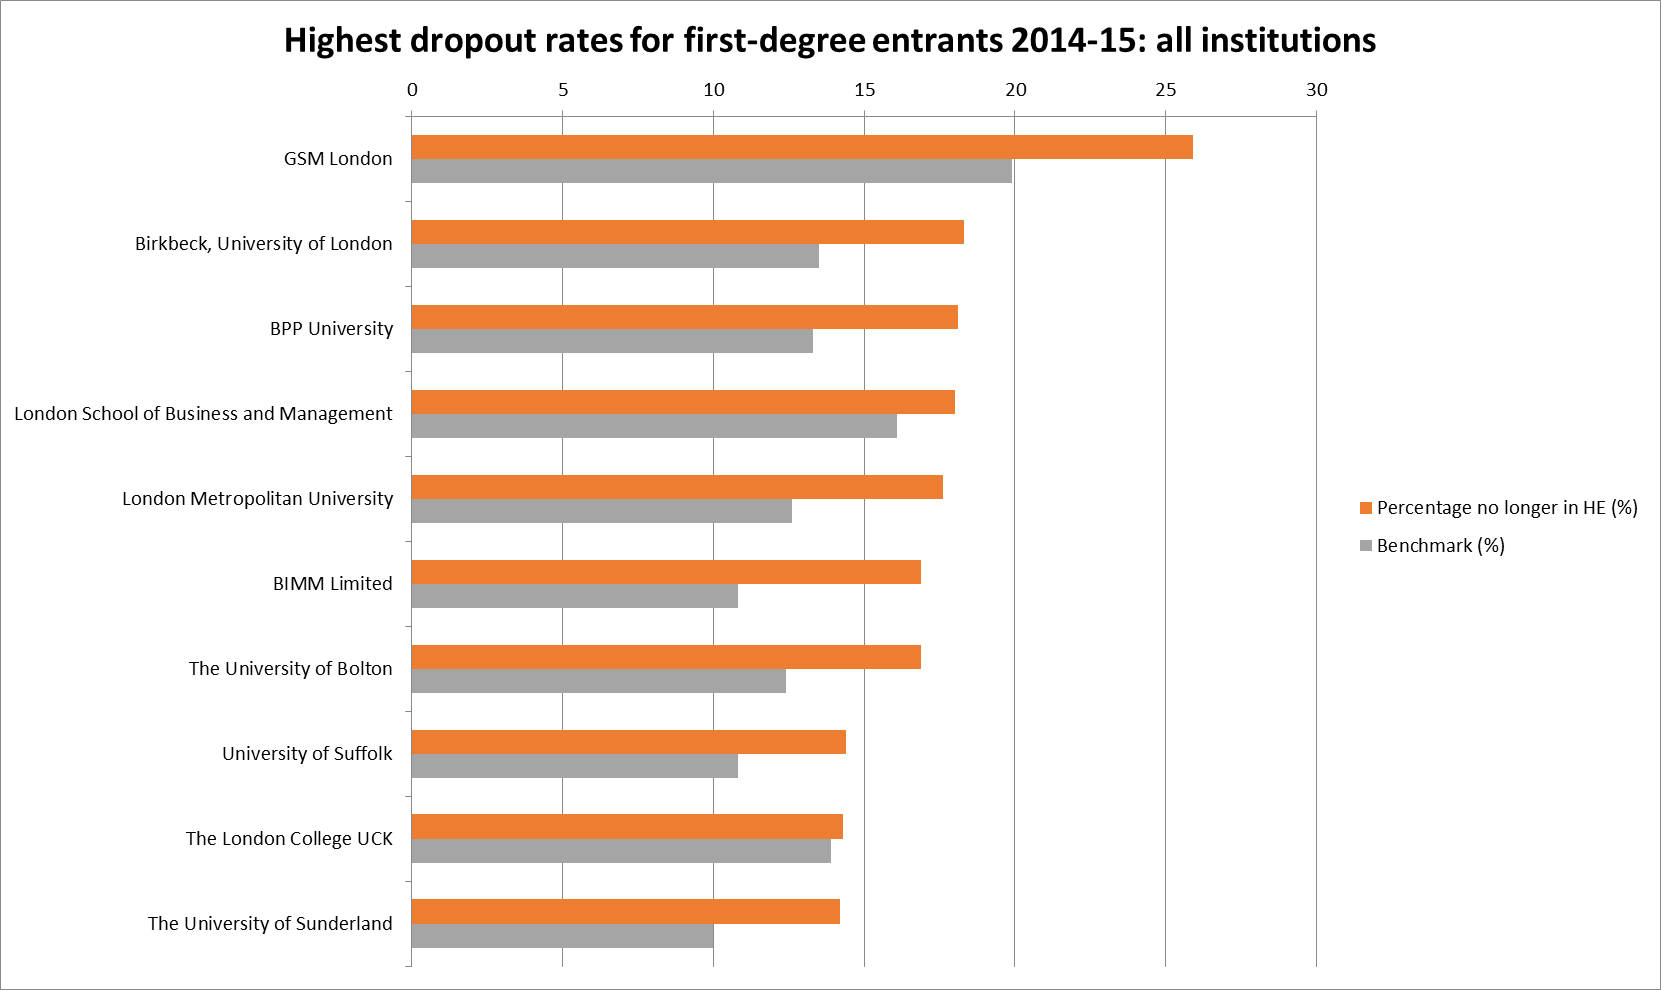 Ten highest dropout rates in England in 2014-15